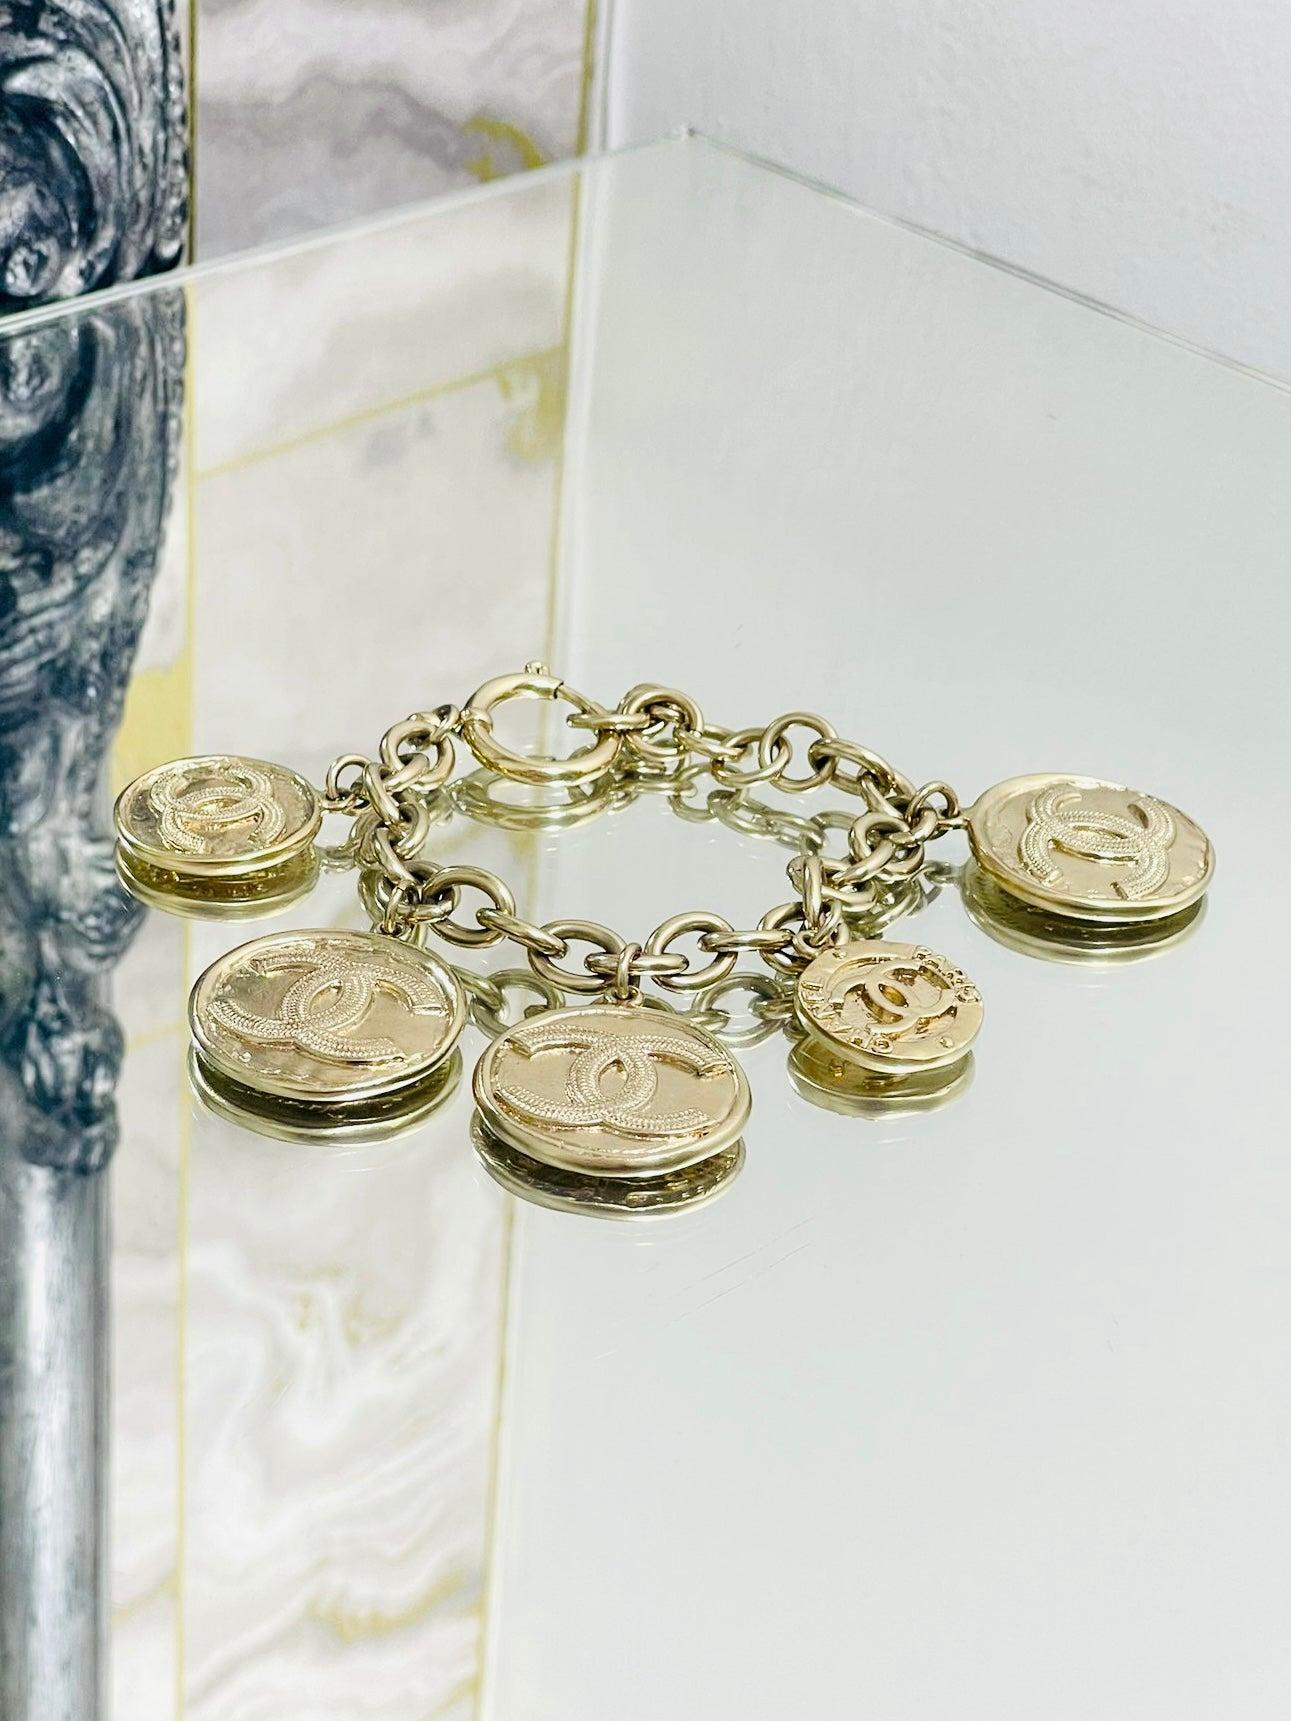 Chanel Vintage 'CC' Logo Coin Bracelet

Gold large link bracelet with five different sized medallion coins on onside all  having the  'CC' logo and to the other side with a Chanel Paris and further 'CC' logos. From 2009 collection.

Additional